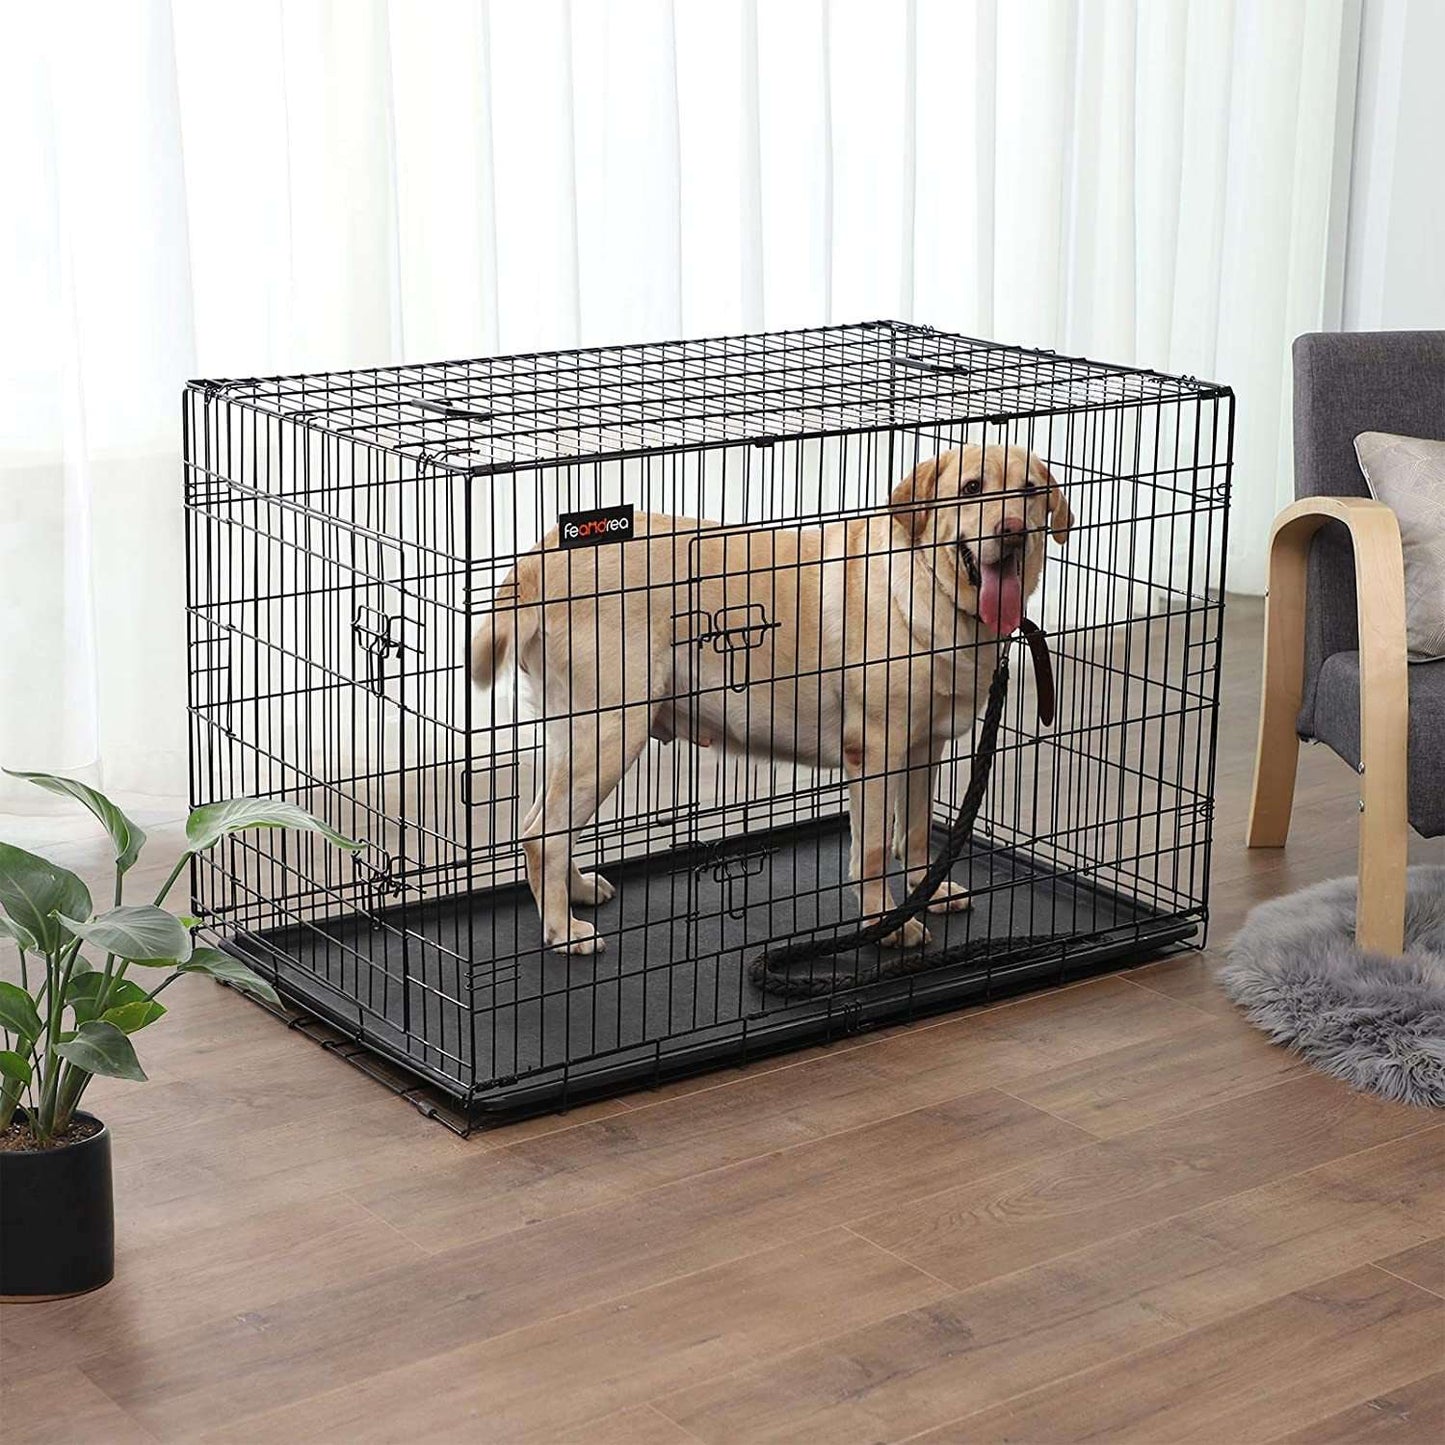 Nancy's Dog Crate - Crate For Dog - 2 Door Kennel - Car Crate